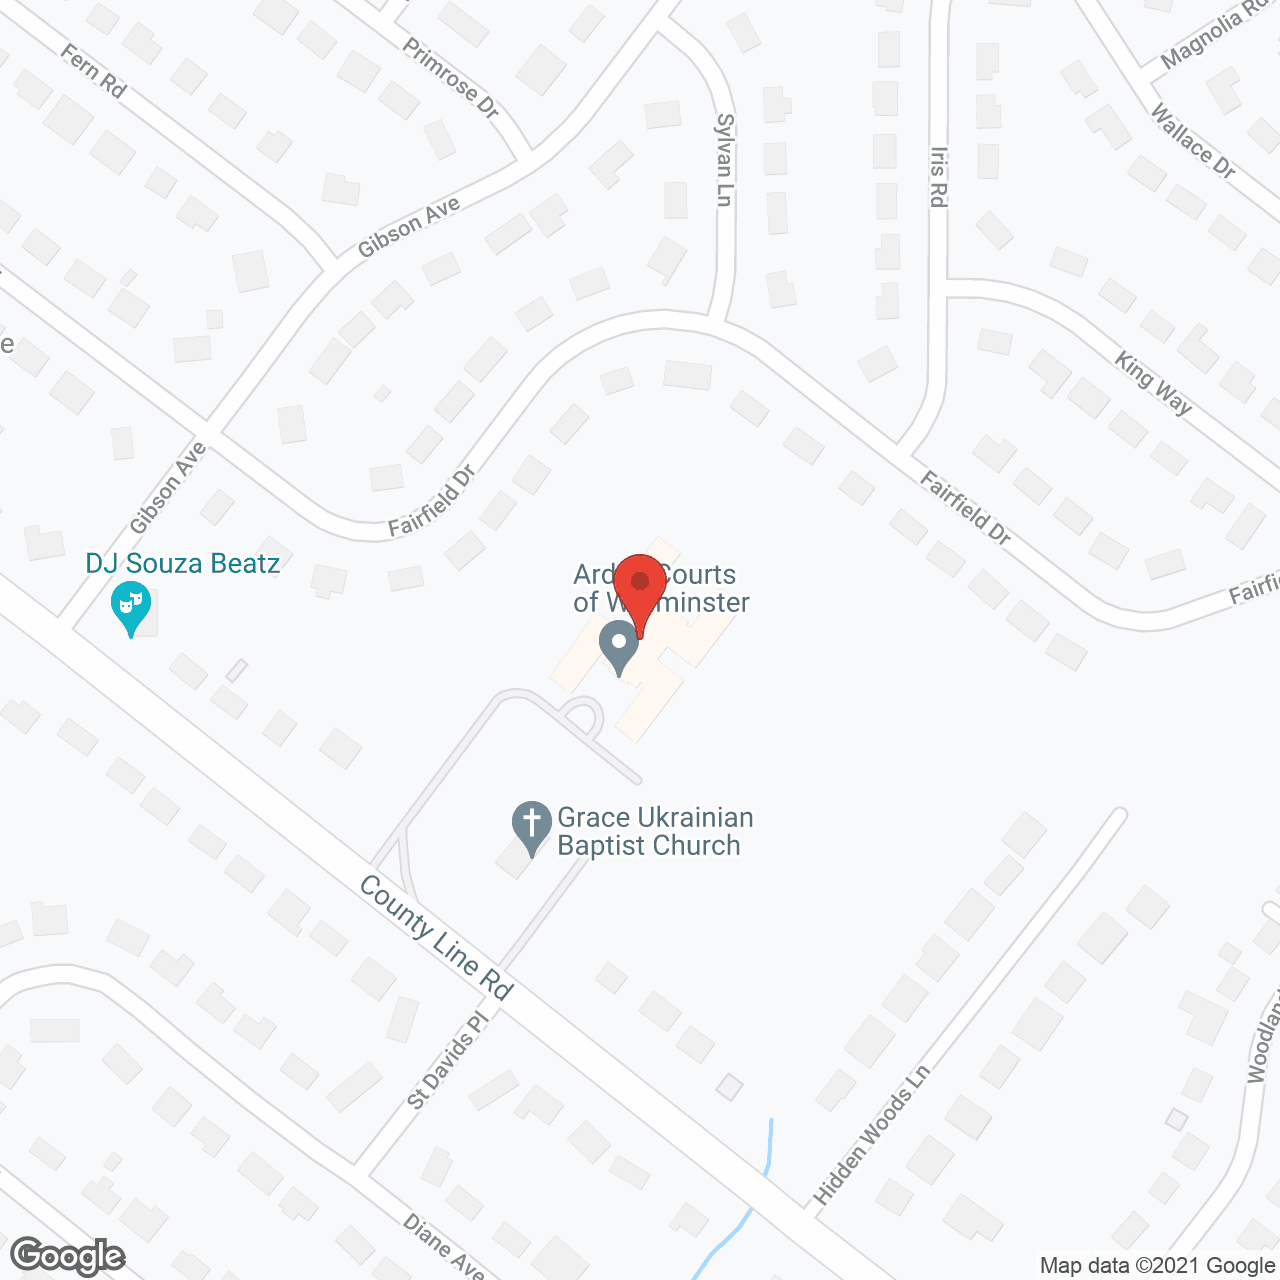 Arden Courts A ProMedica Memory Care Community in Warminster in google map